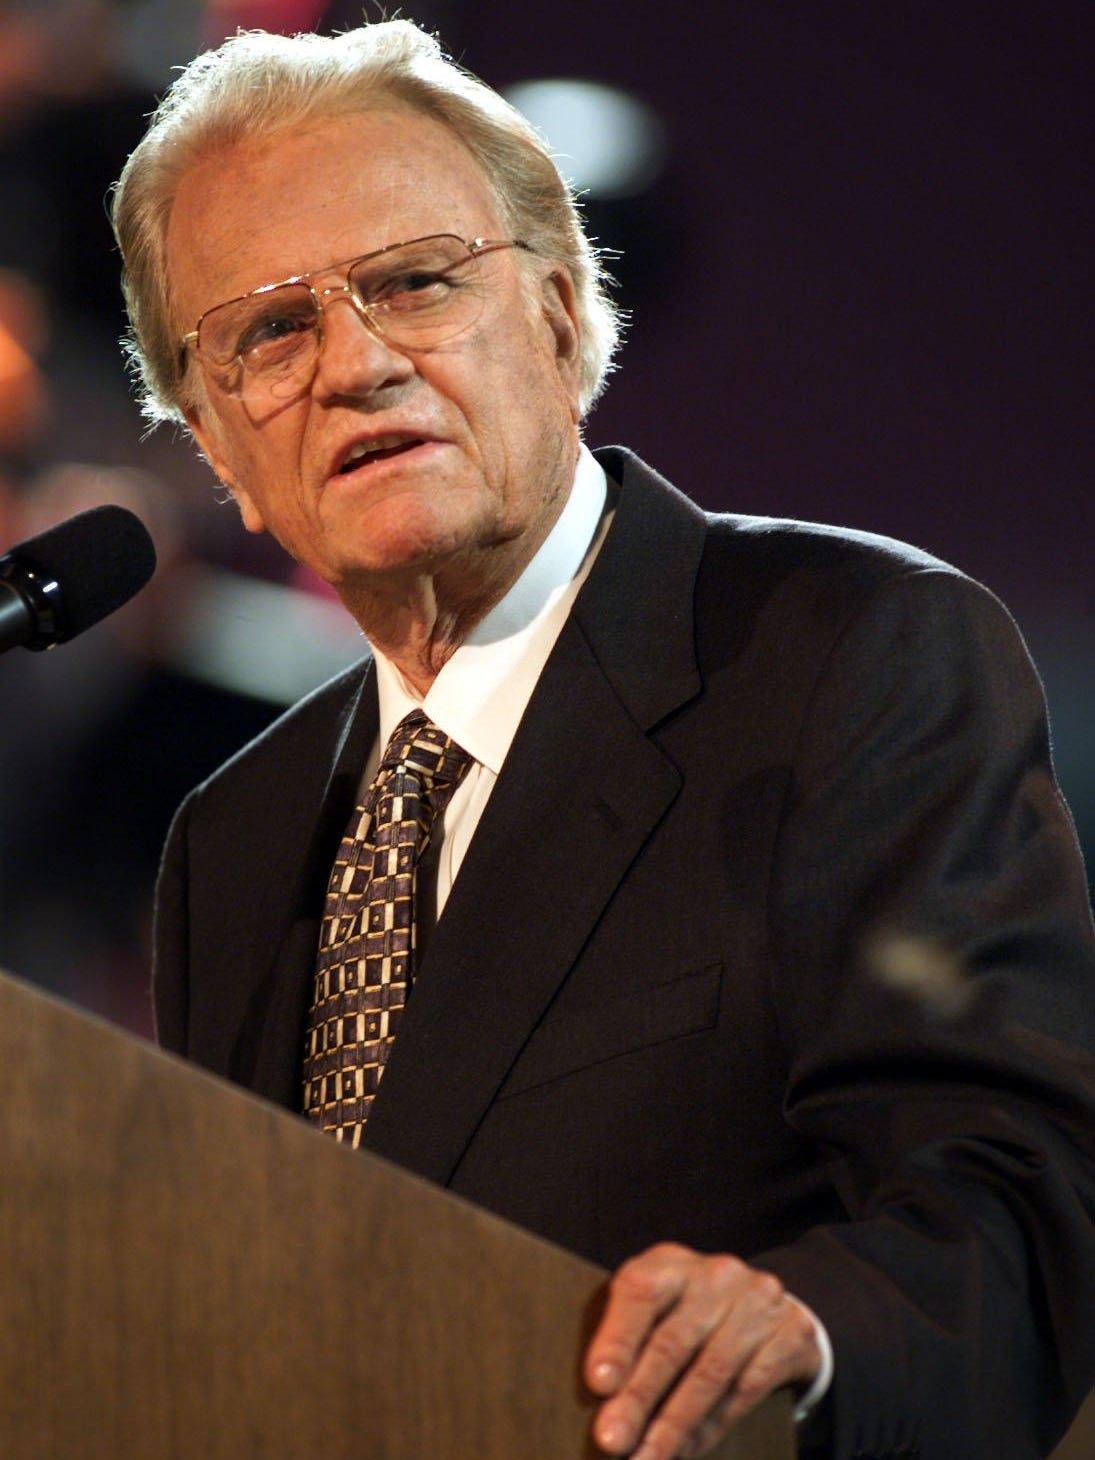 DOWNLOAD MP3: FINDING GOD'S WILL YOUR LIFE By Billy Graham (sermon) 17